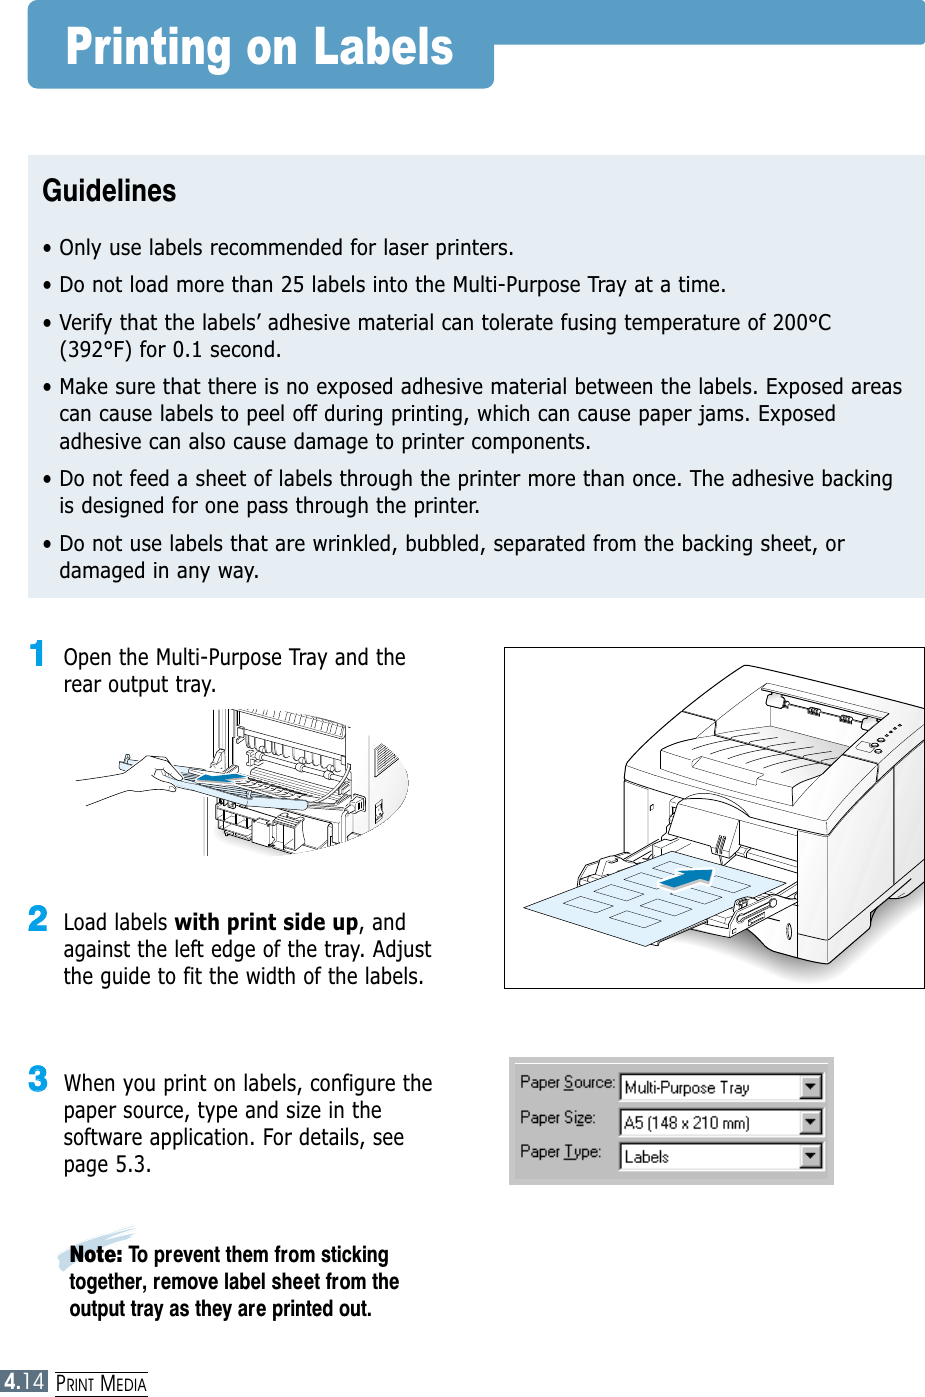 PRINT MEDIA4.14Printing on LabelsGuidelines• Only use labels recommended for laser printers.• Do not load more than 25 labels into the Multi-Purpose Tray at a time.• Verify that the labels’ adhesive material can tolerate fusing temperature of 200°C(392°F) for 0.1 second.• Make sure that there is no exposed adhesive material between the labels. Exposed areascan cause labels to peel off during printing, which can cause paper jams. Exposedadhesive can also cause damage to printer components.• Do not feed a sheet of labels through the printer more than once. The adhesive backingis designed for one pass through the printer.• Do not use labels that are wrinkled, bubbled, separated from the backing sheet, ordamaged in any way.11Open the Multi-Purpose Tray and therear output tray.22Load labels with print side up, andagainst the left edge of the tray. Adjustthe guide to fit the width of the labels.33When you print on labels, configure thepaper source, type and size in thesoftware application. For details, seepage 5.3.Note: To prevent them from stickingtogether, remove label sheet from theoutput tray as they are printed out.